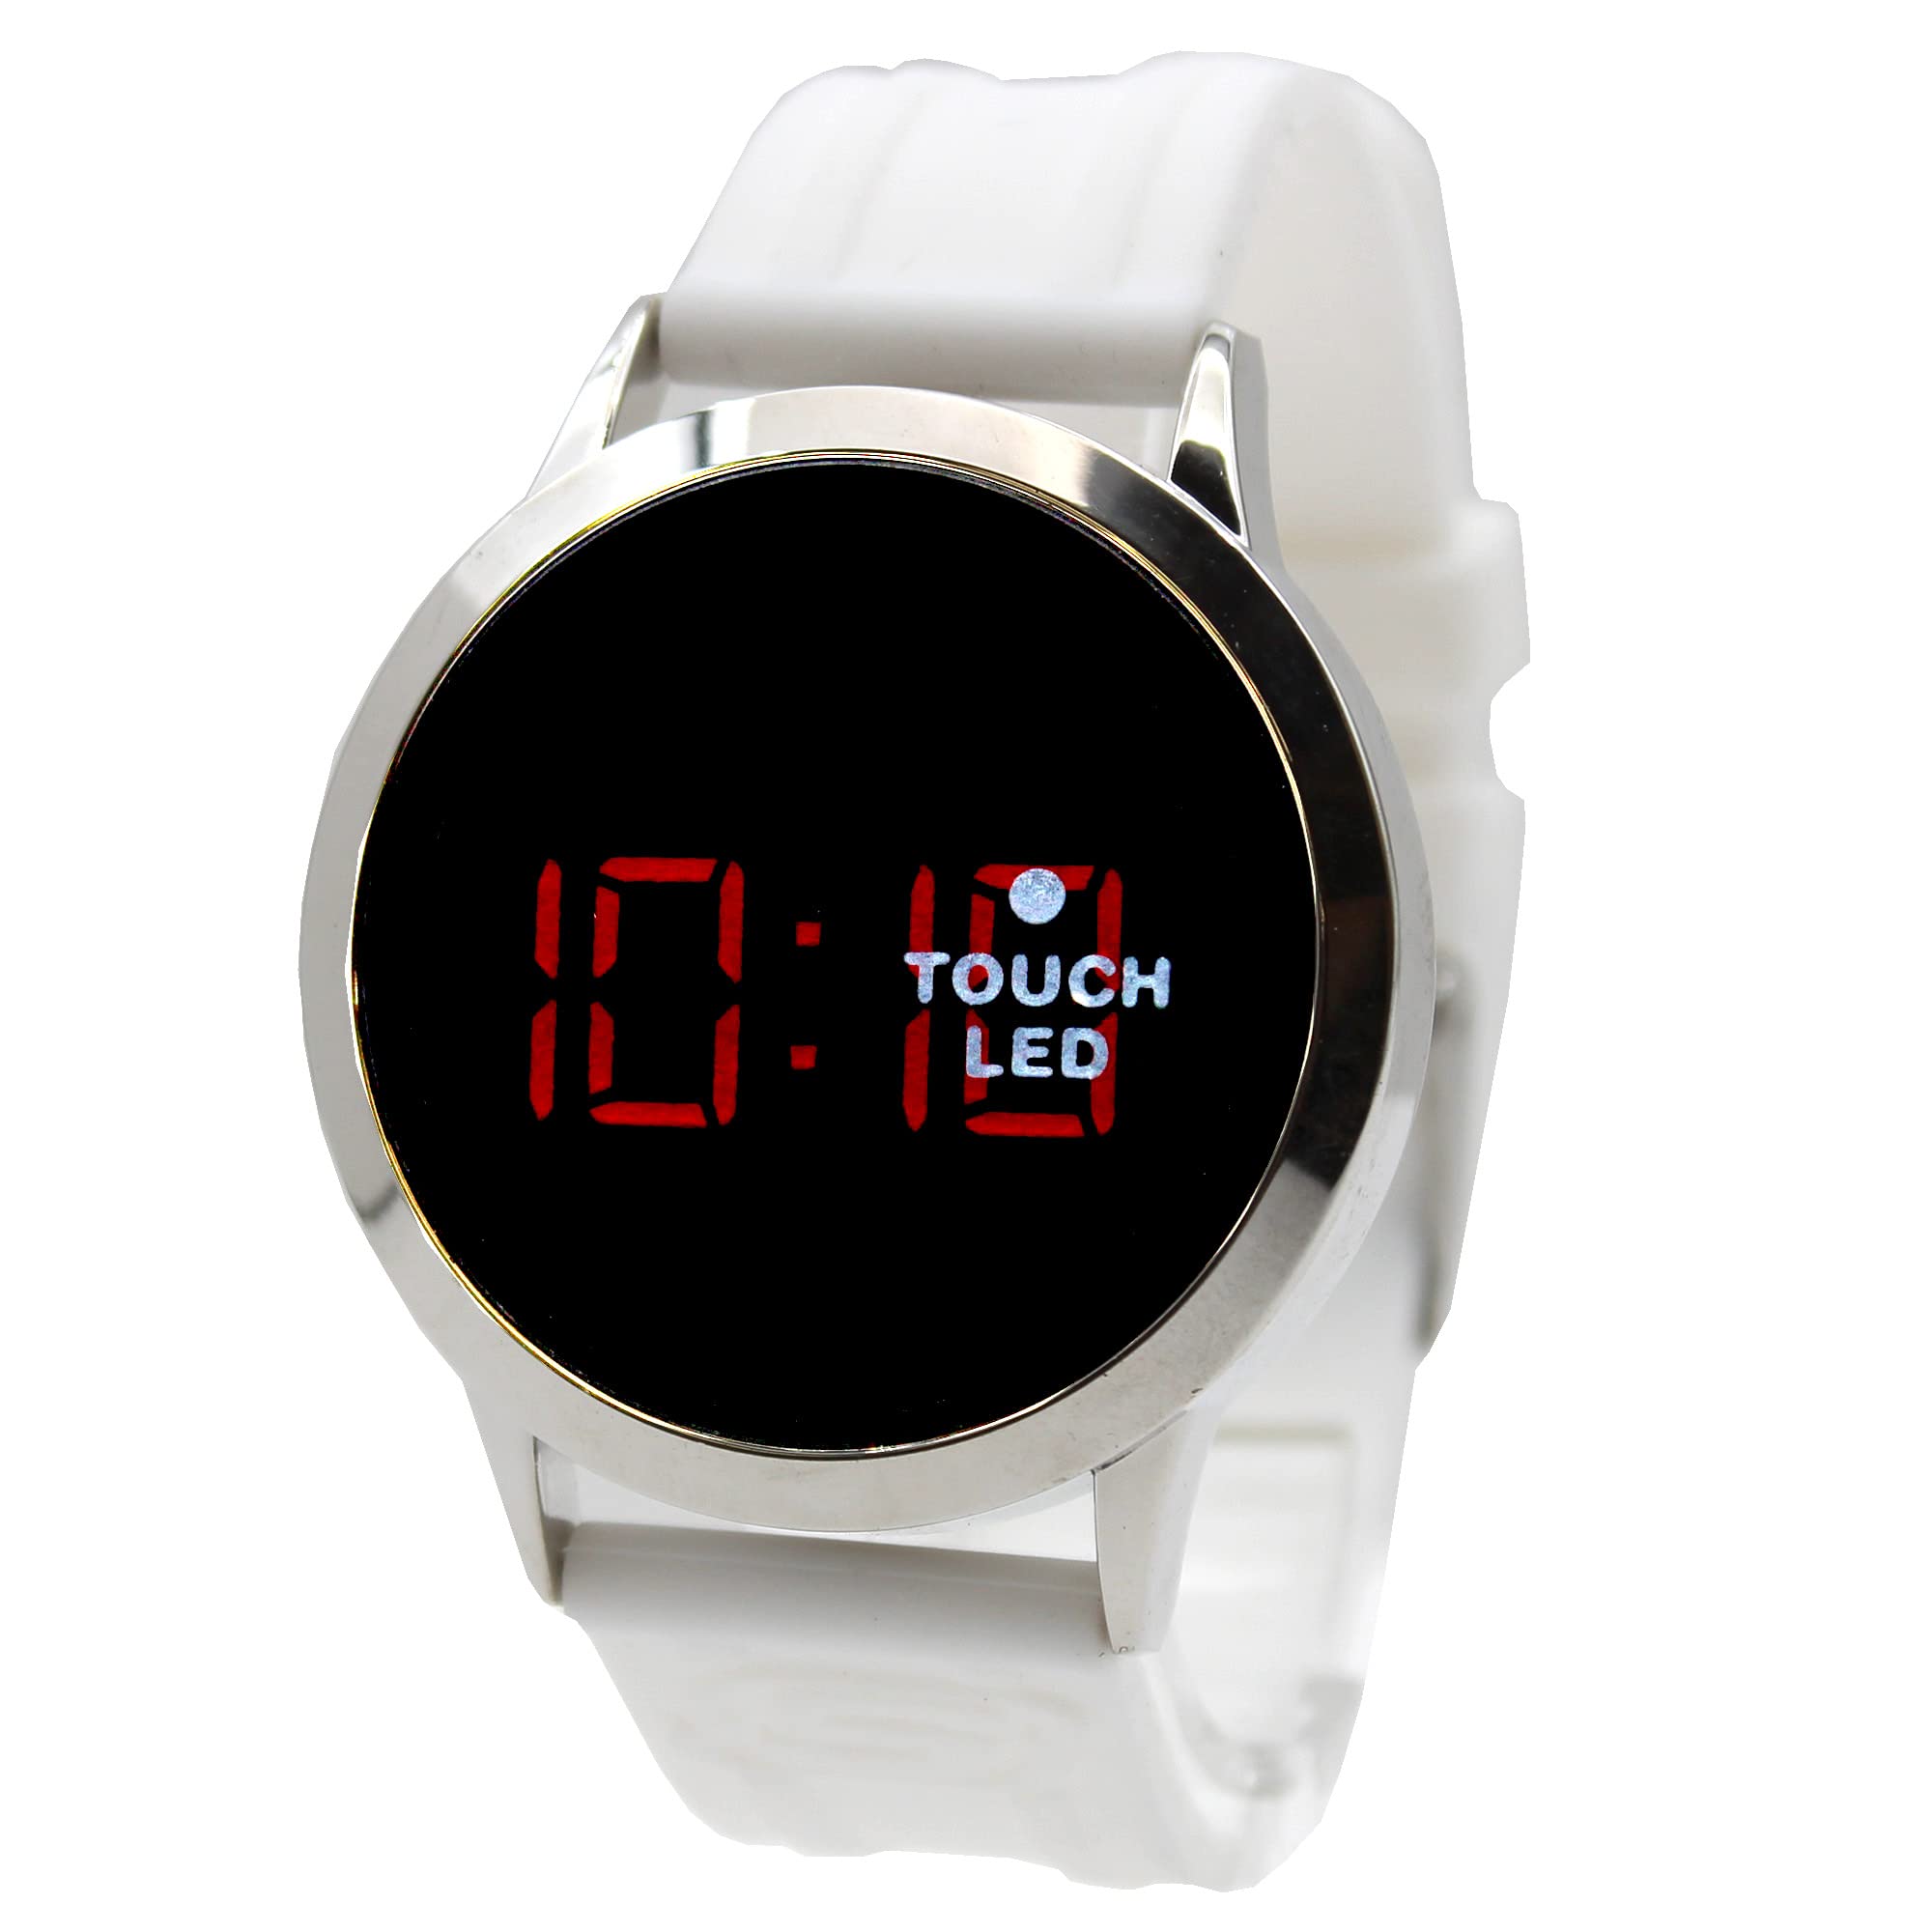 Accutime Skechers White Digital Touch Quartz Watch with Red Digital Display and White Silicone Strap for Kids (Model: SKE4050AZ)